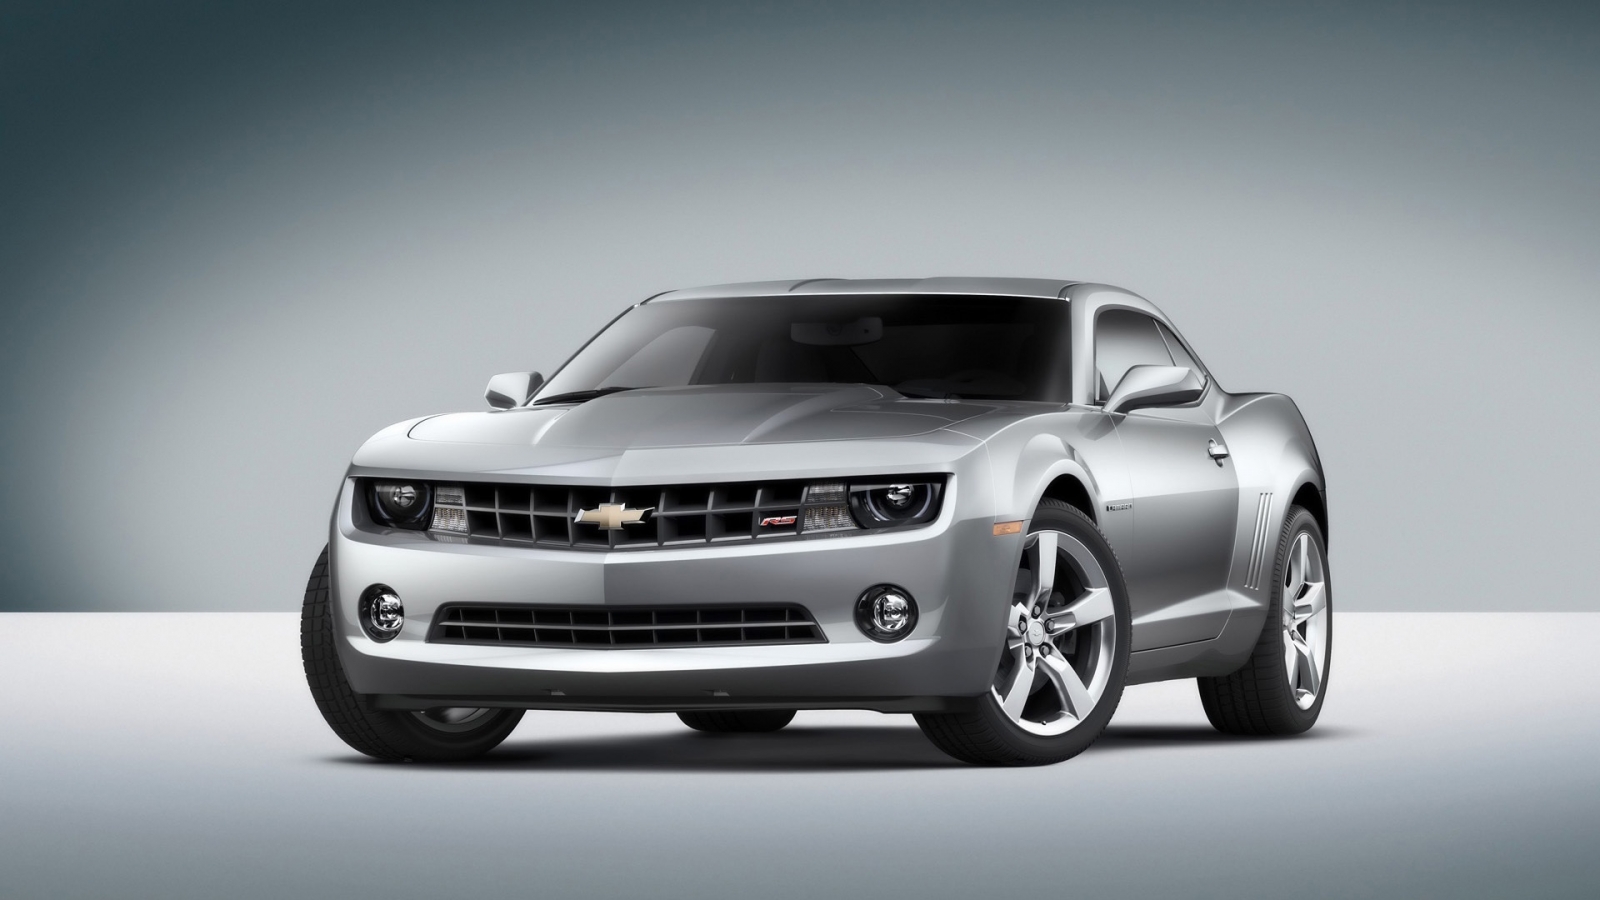 Chevrolet Camaro RS 2010 Grey Front Angle for 1600 x 900 HDTV resolution